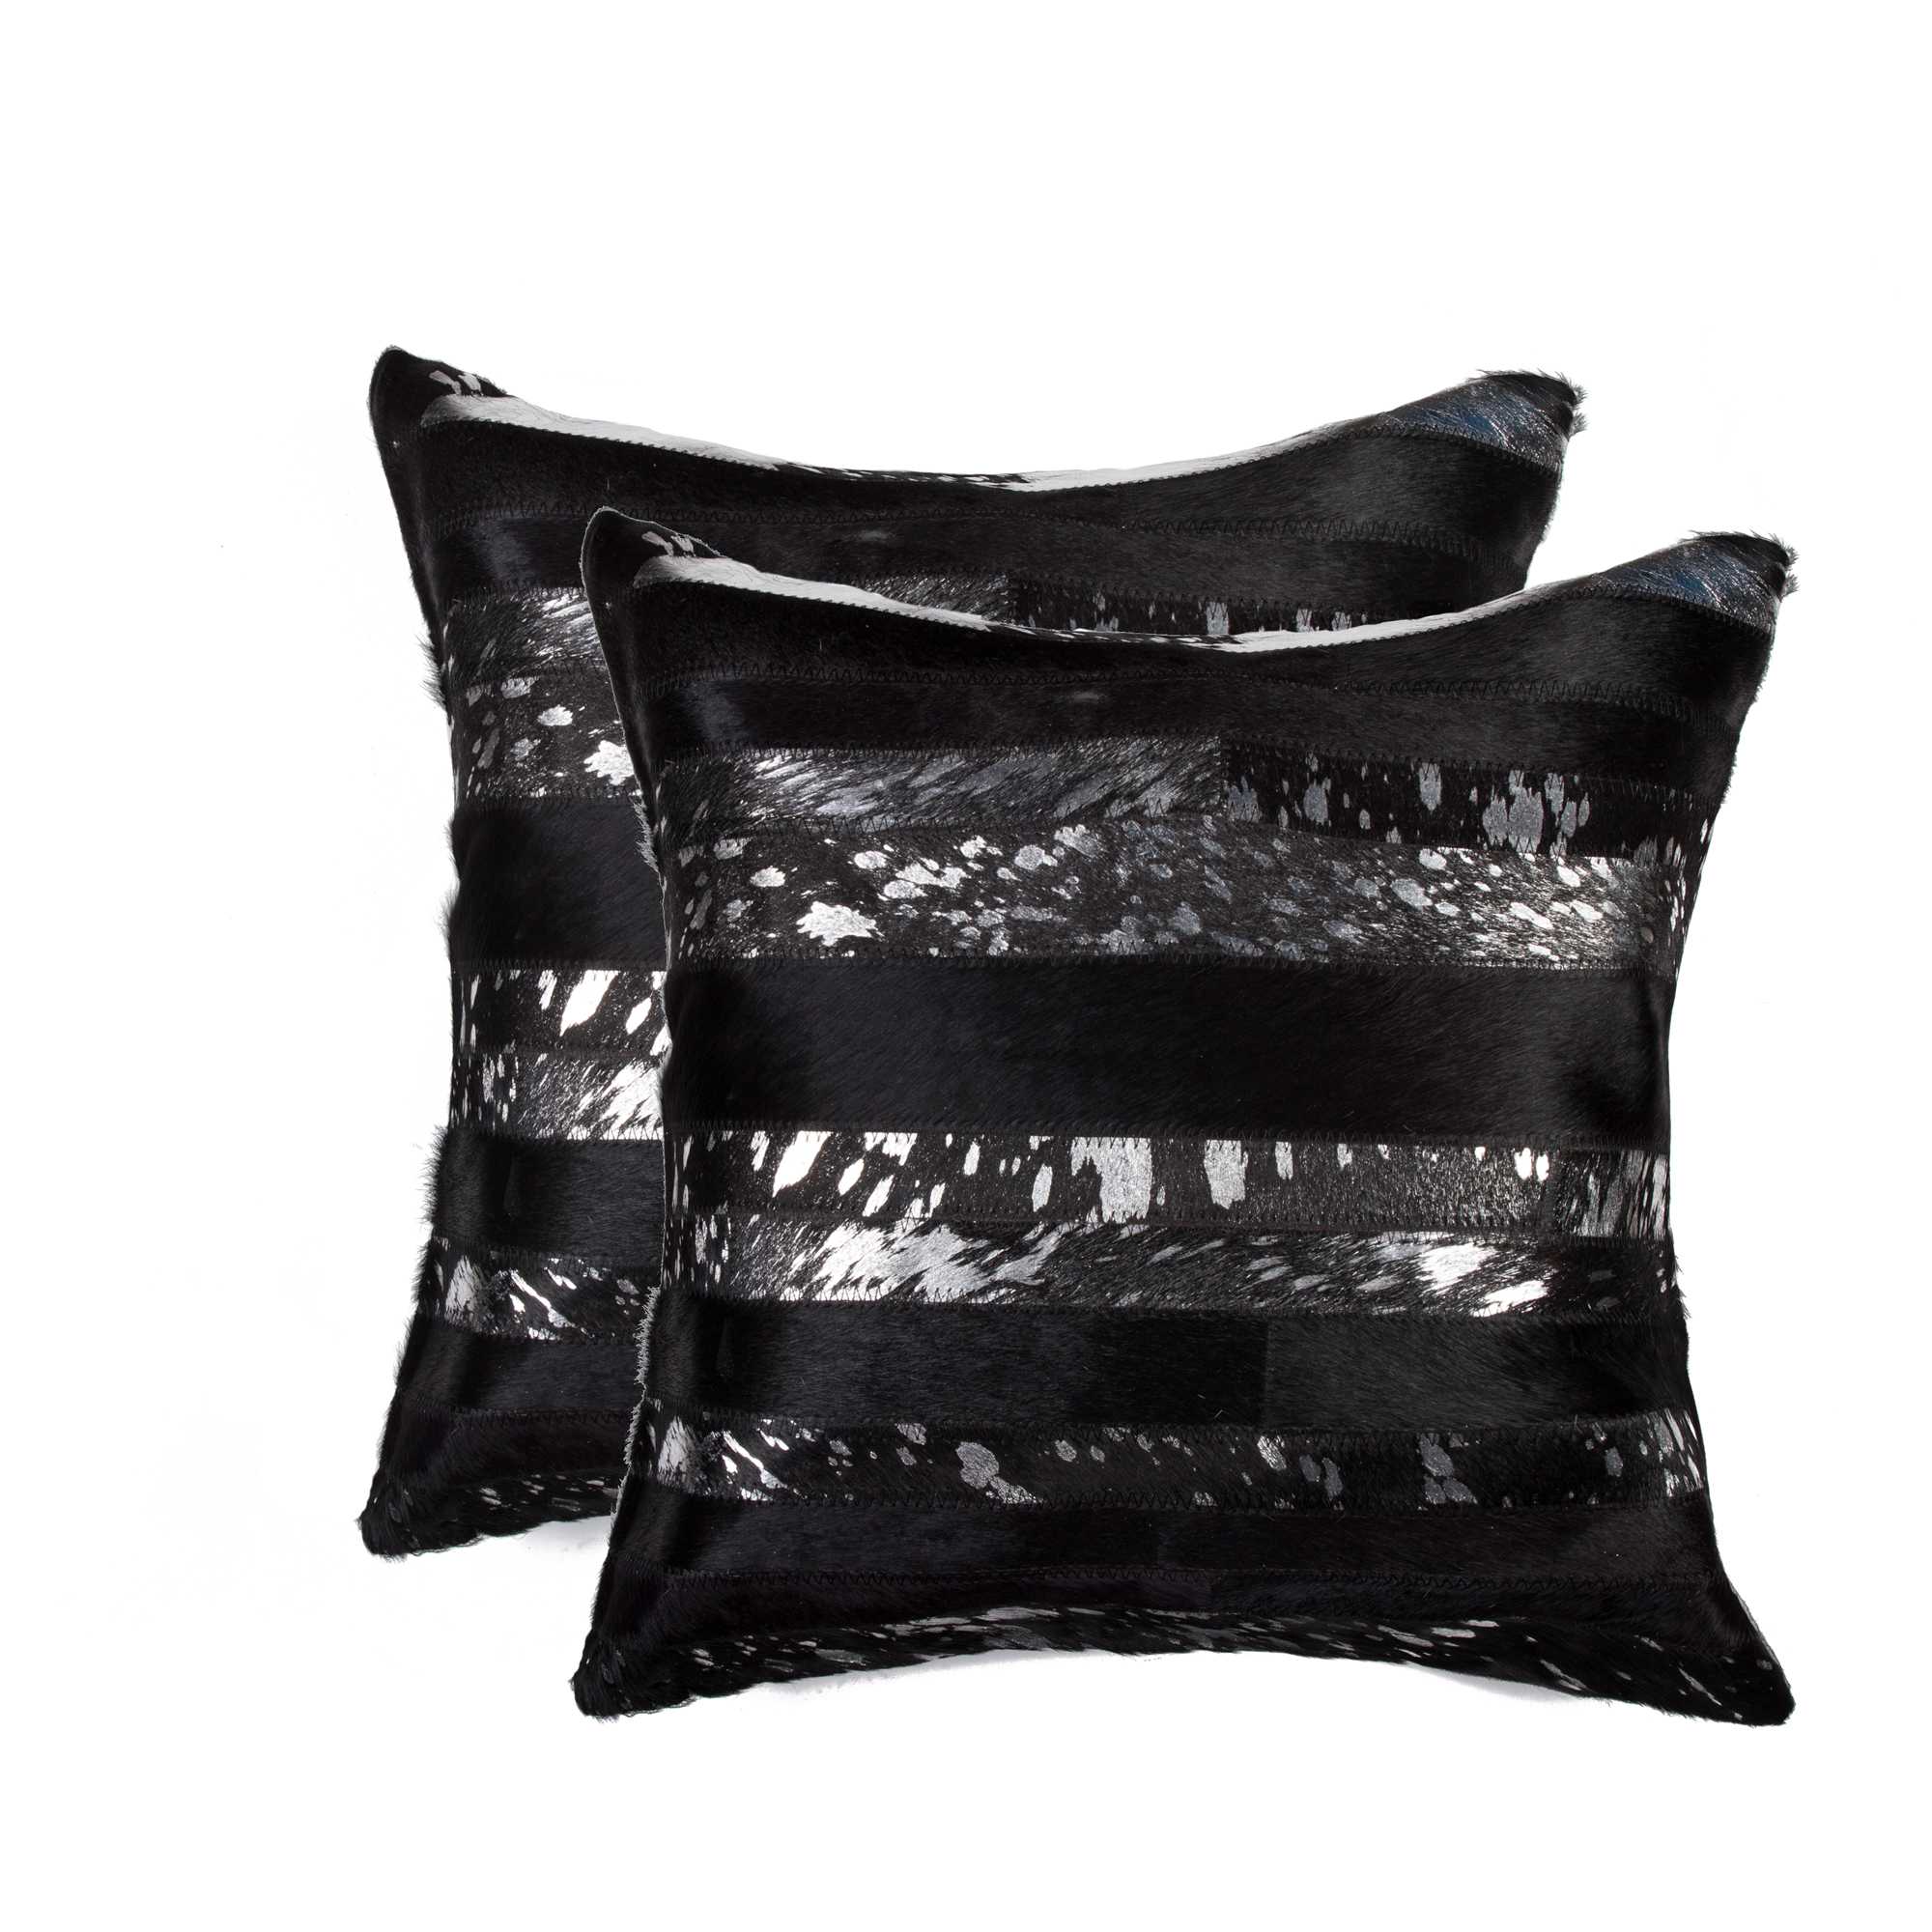 18" x 18" x 5" Gold And Black - Pillow 2-Pack